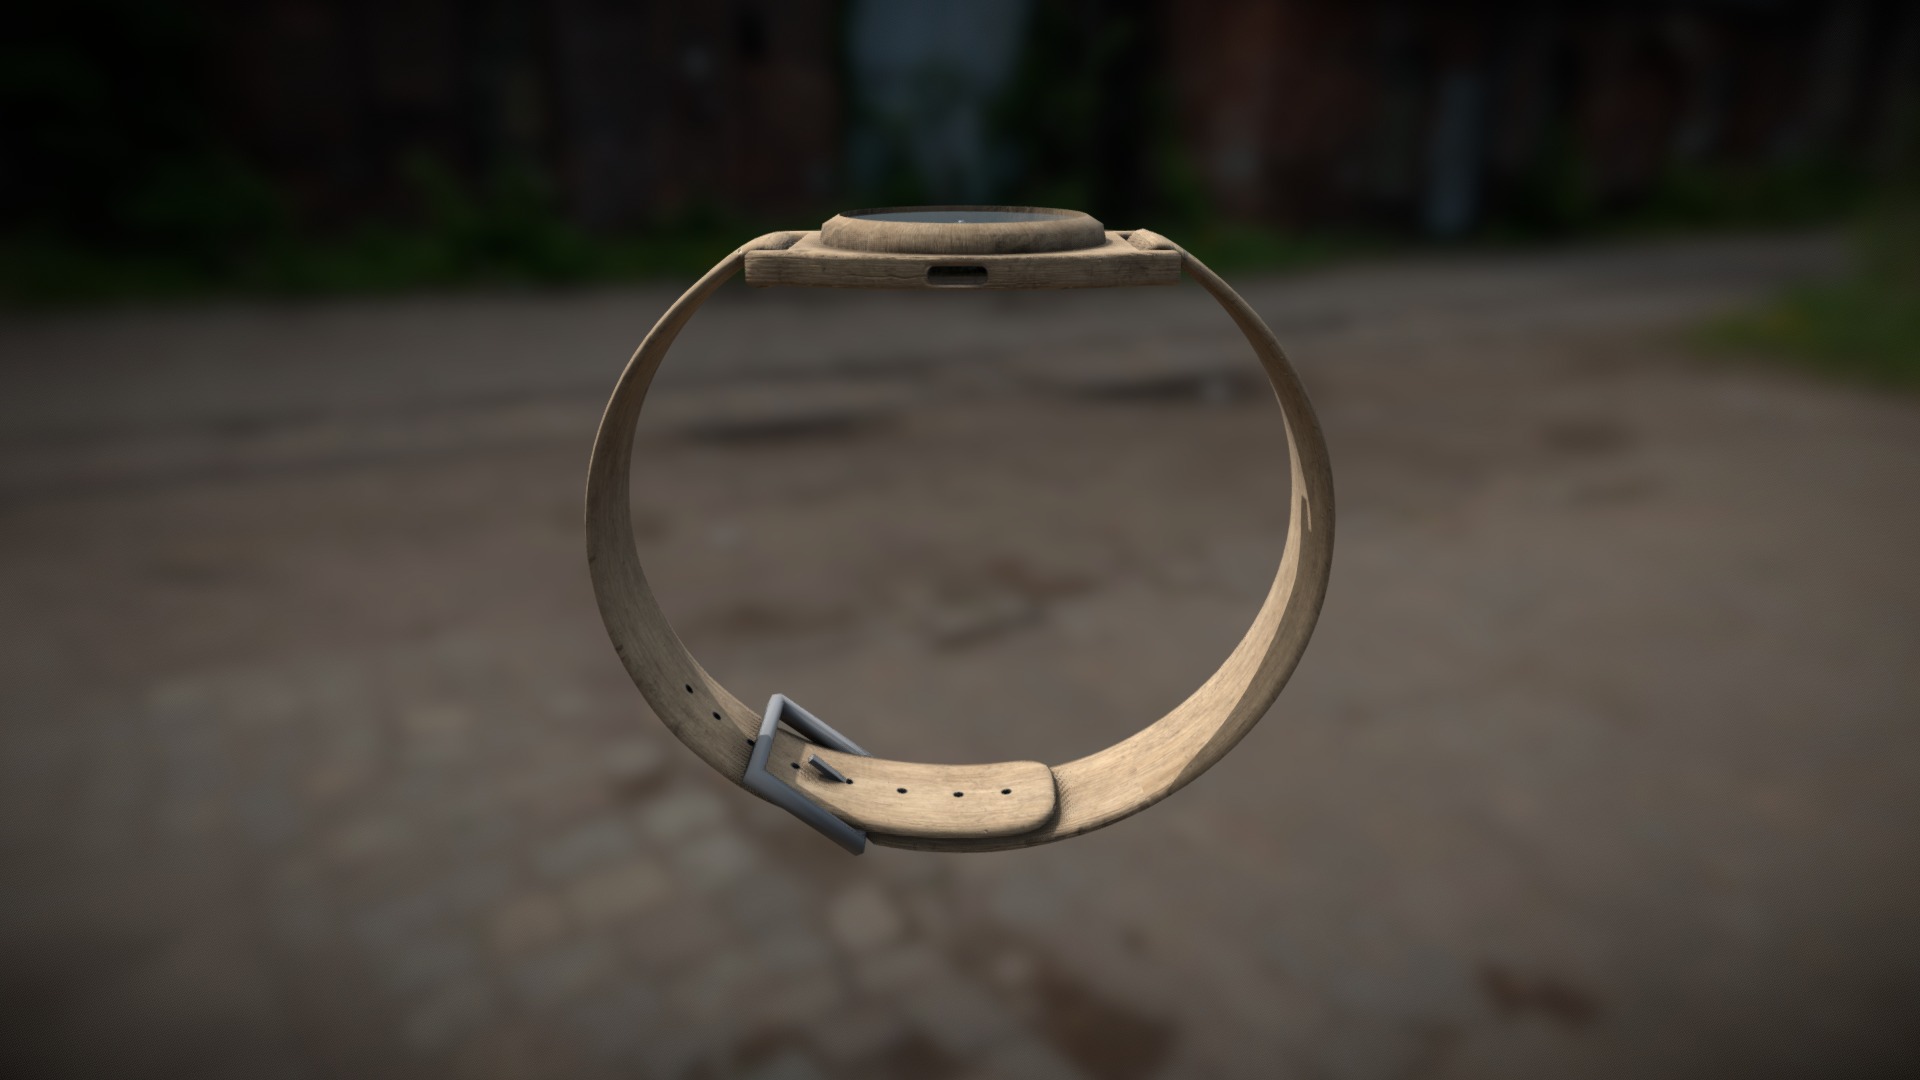 3D model Watch 2 - This is a 3D model of the Watch 2. The 3D model is about a ring on a surface.